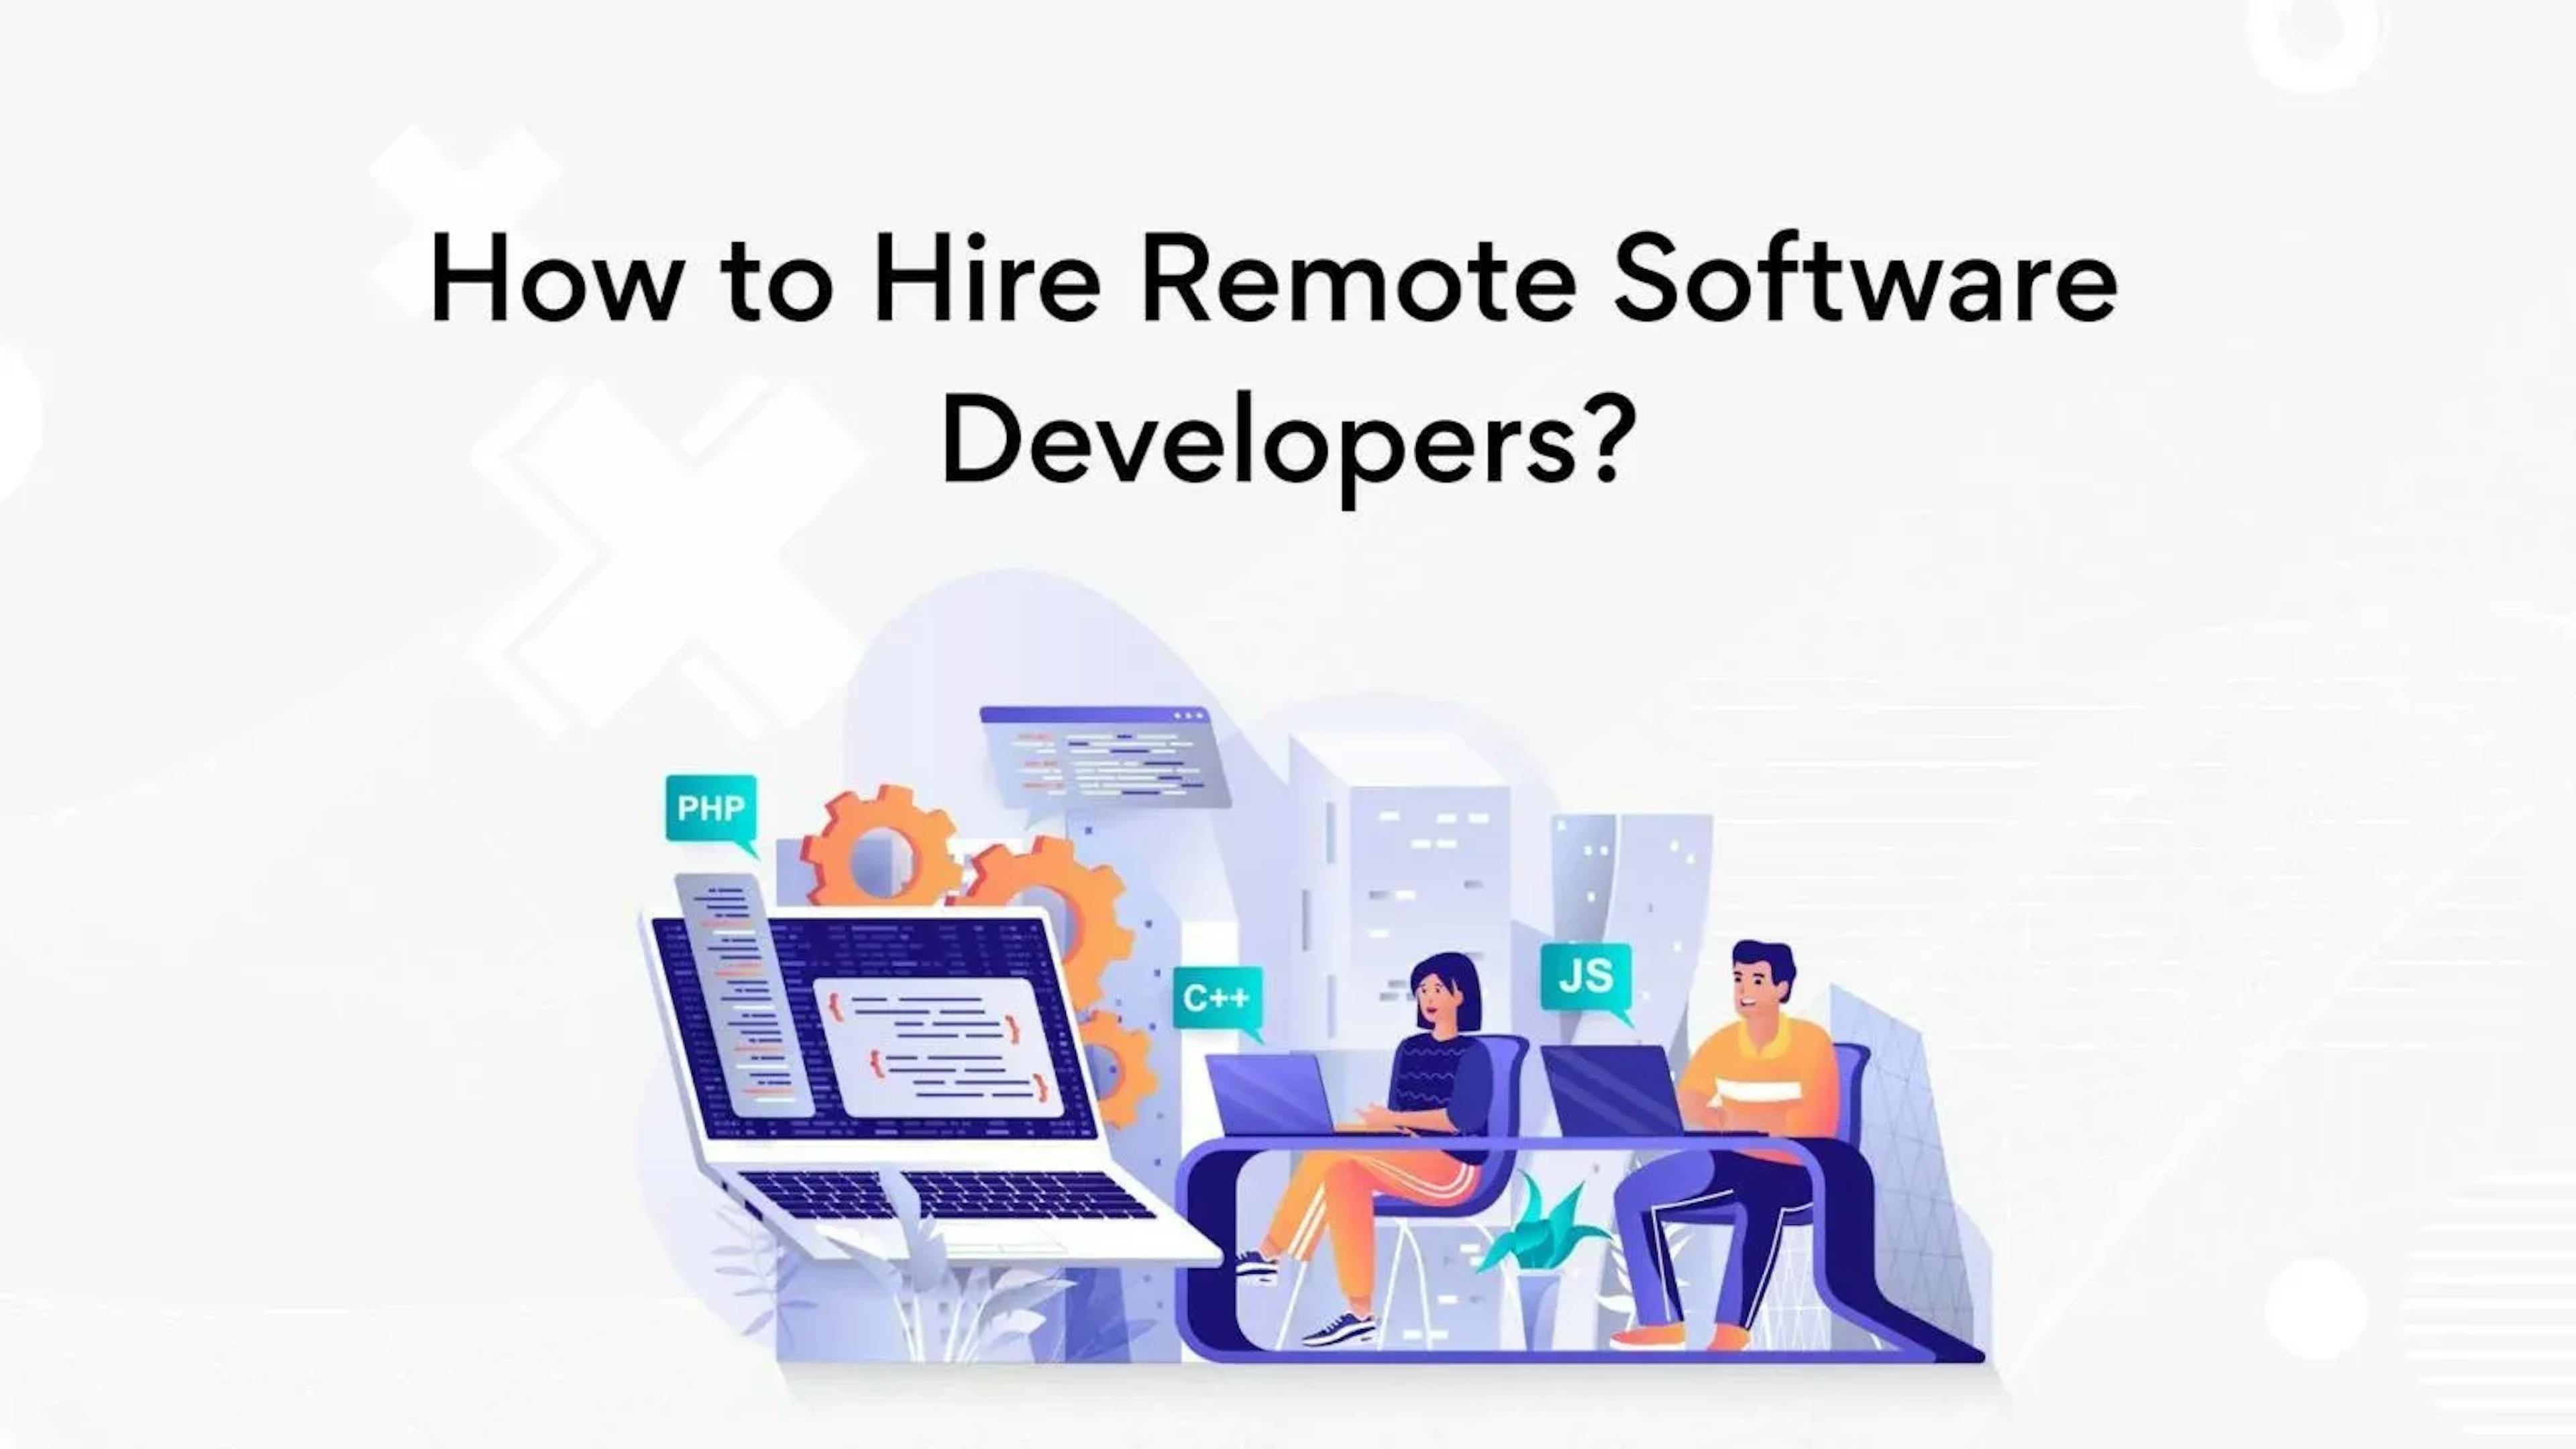 Want to Hire Remote Software Developers? Read This First!